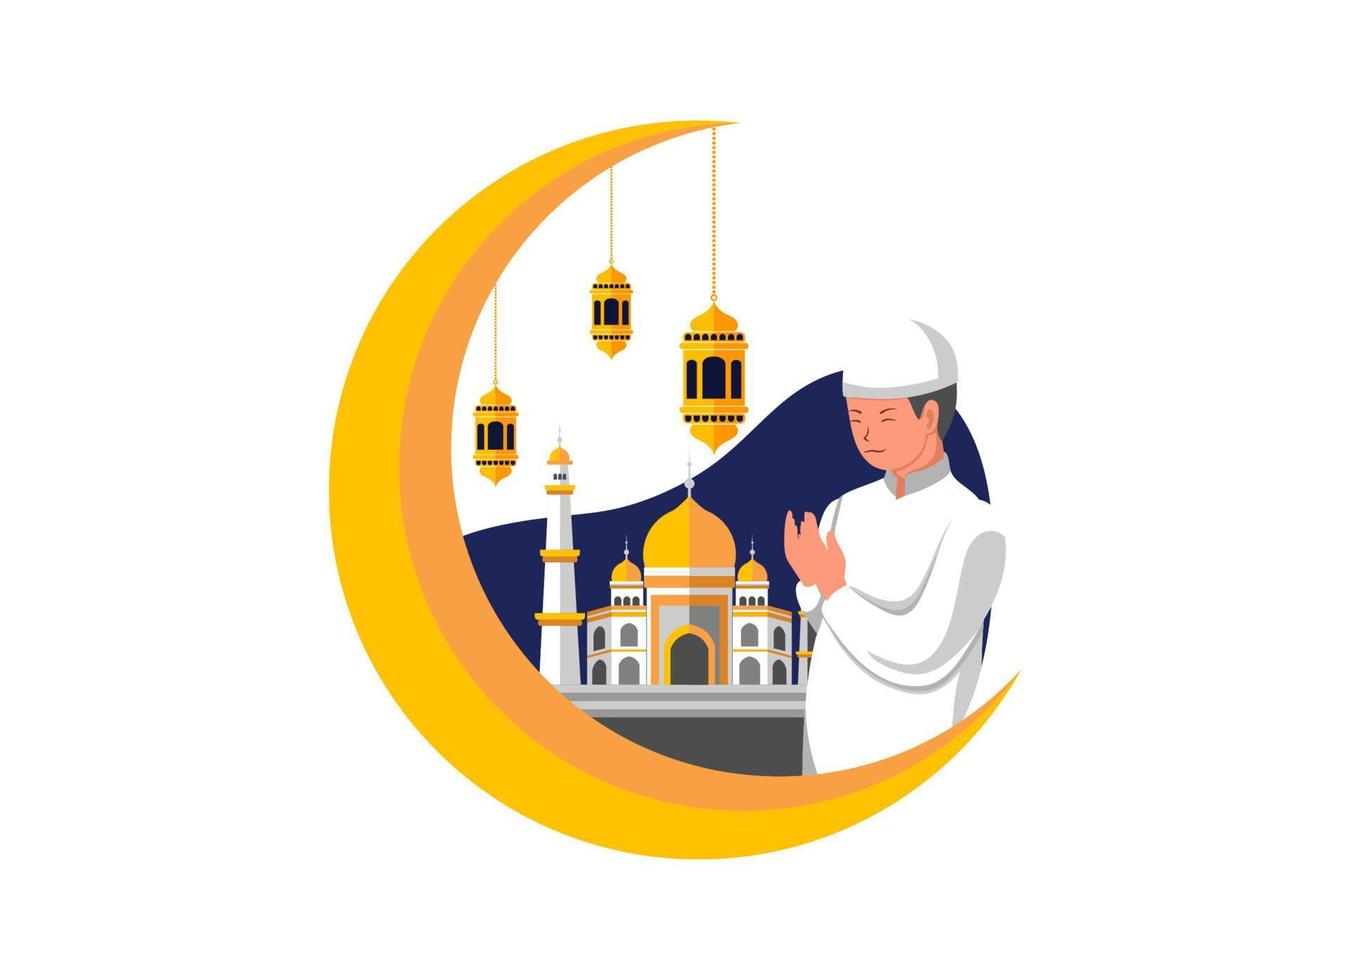 Flat Design Illustration of a Boy Praying with Mosque and Crescent Moon Elements vector